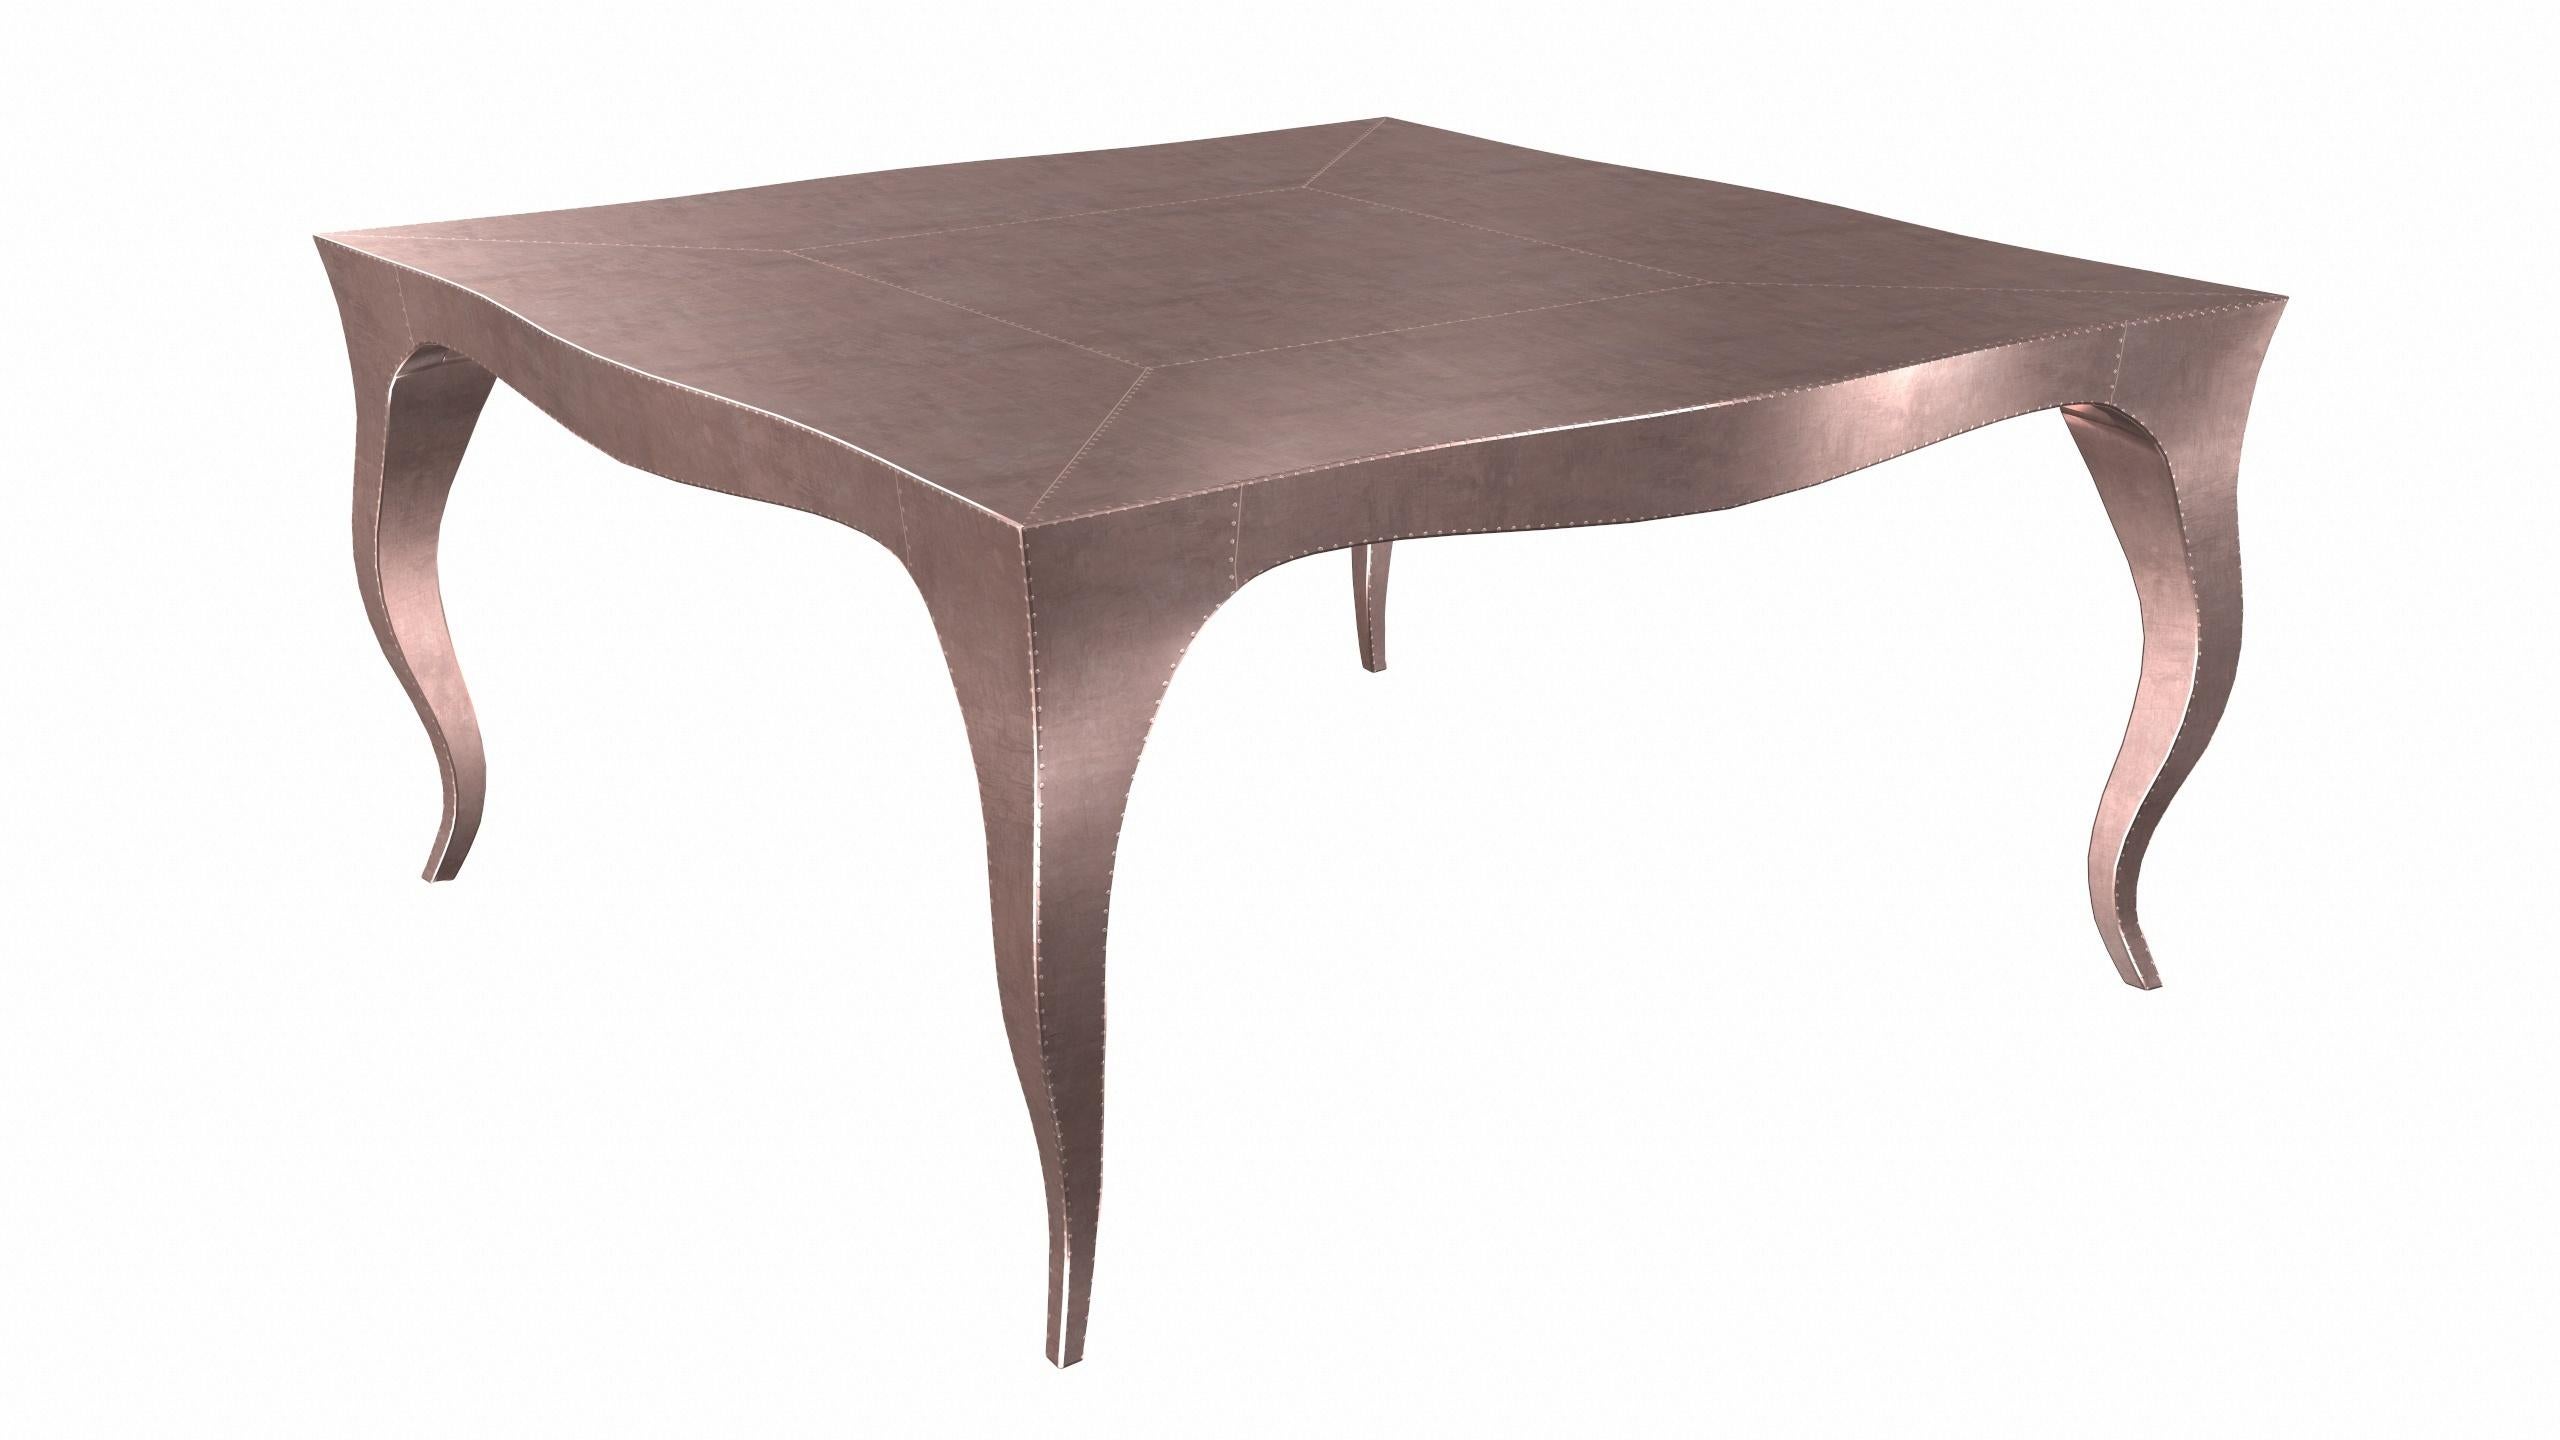 Metal Louise Art Deco Center Tables Smooth Copper by Paul Mathieu for S.Odegard For Sale